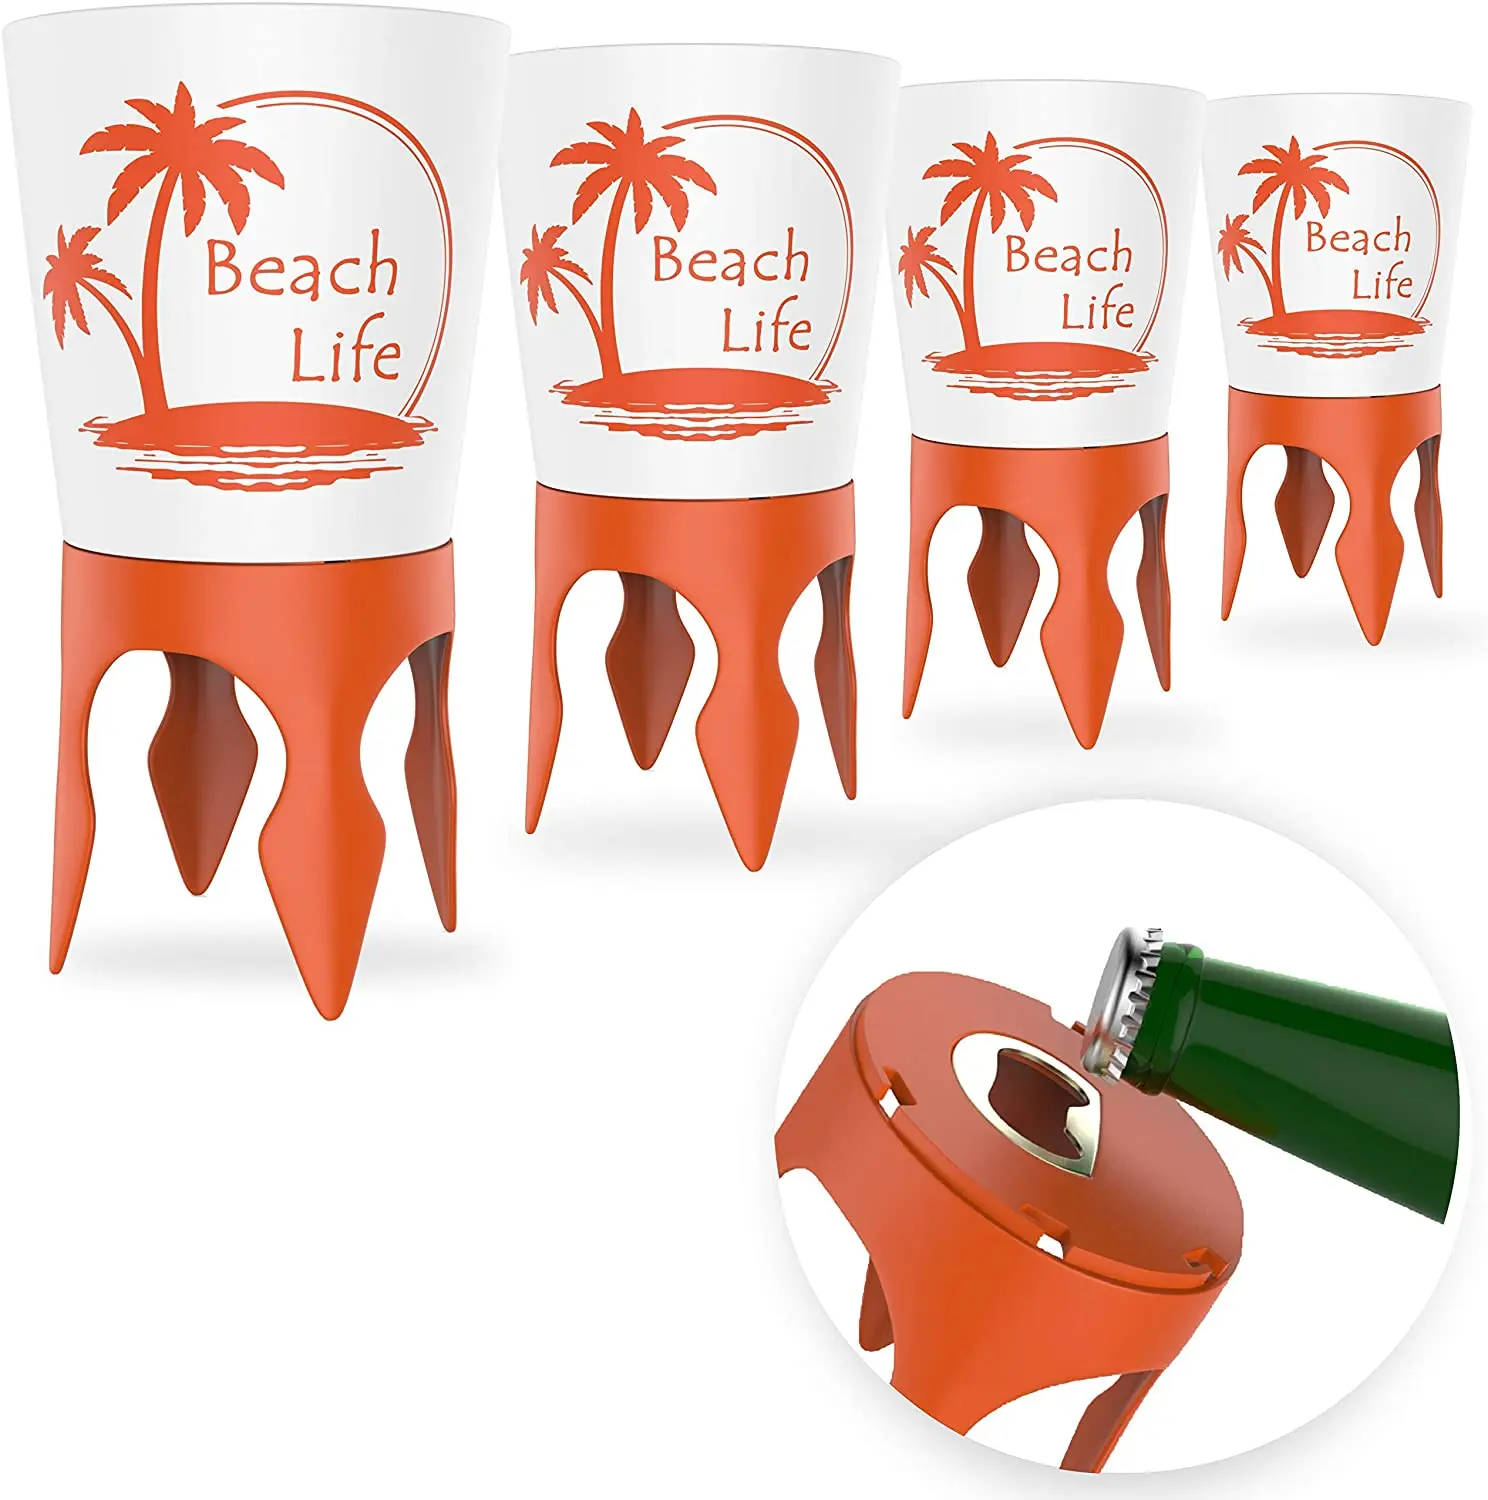 
2020 Amazon Top Seller Plastic Beach Cup Holder with Bottle Opener OEM CUSTOMIZED LOGO yc999 